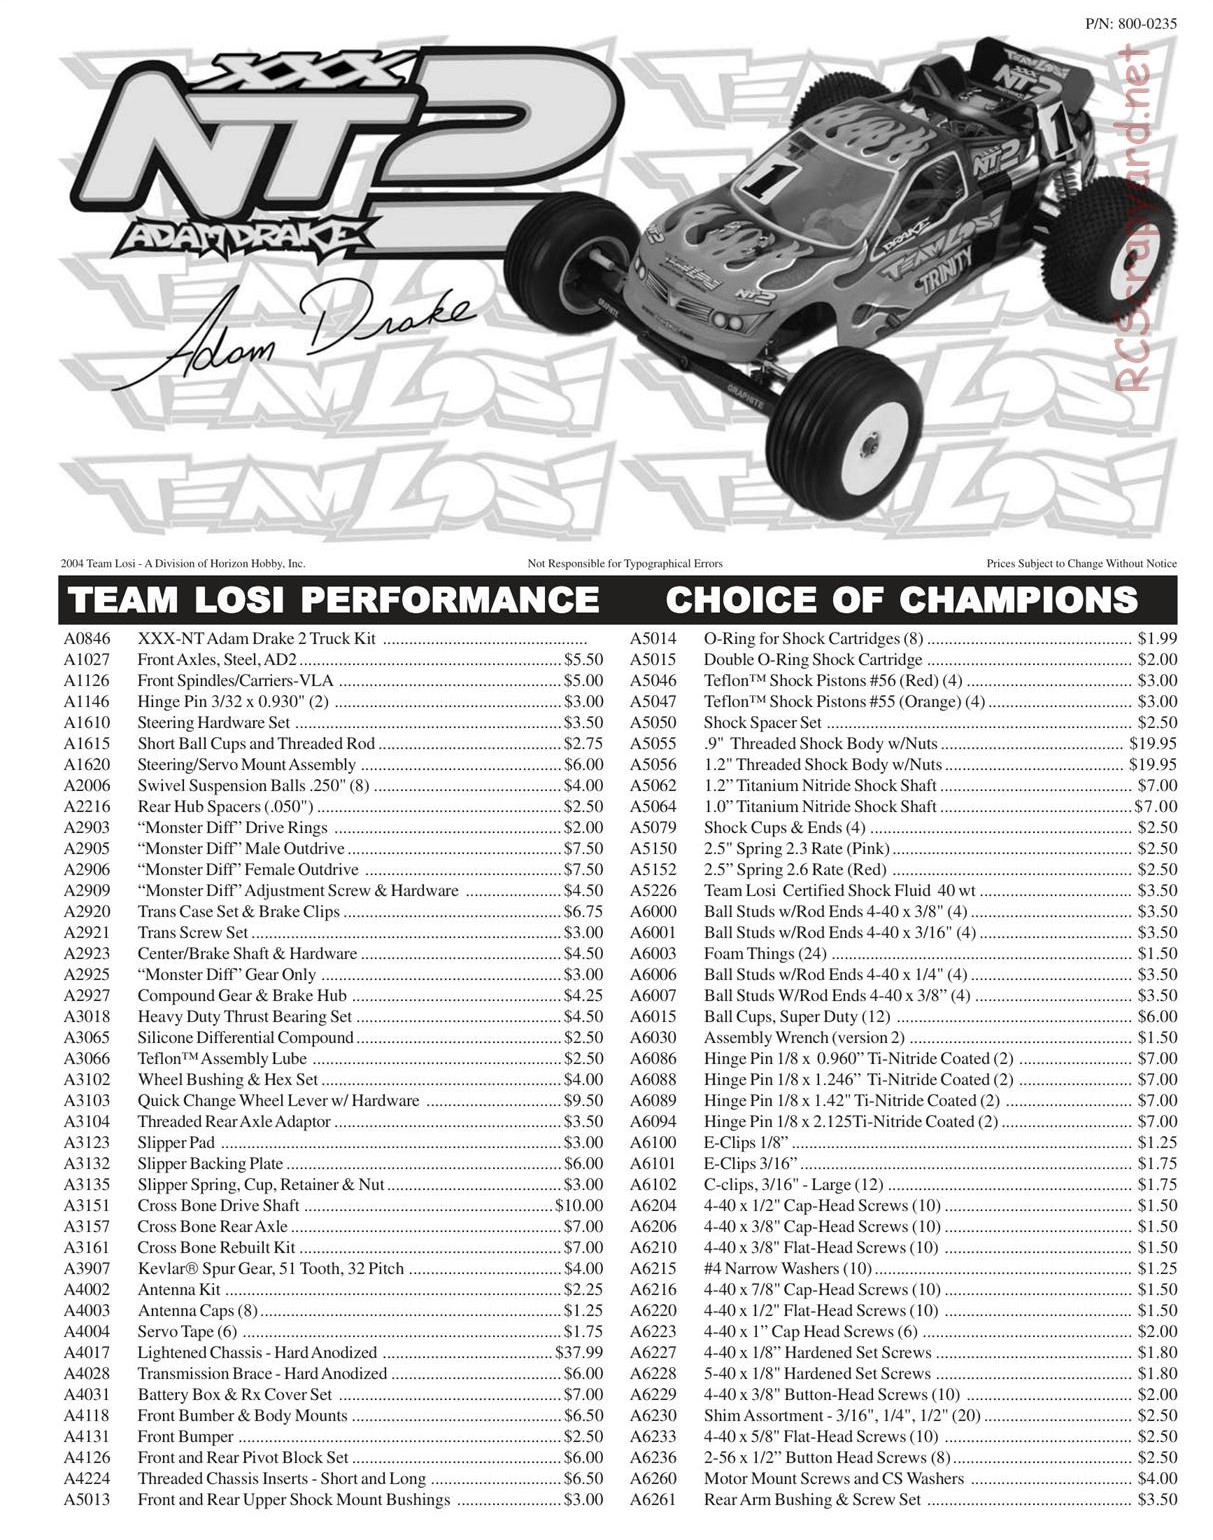 Team Losi - XXX NT AD2 - Manual - Page 1